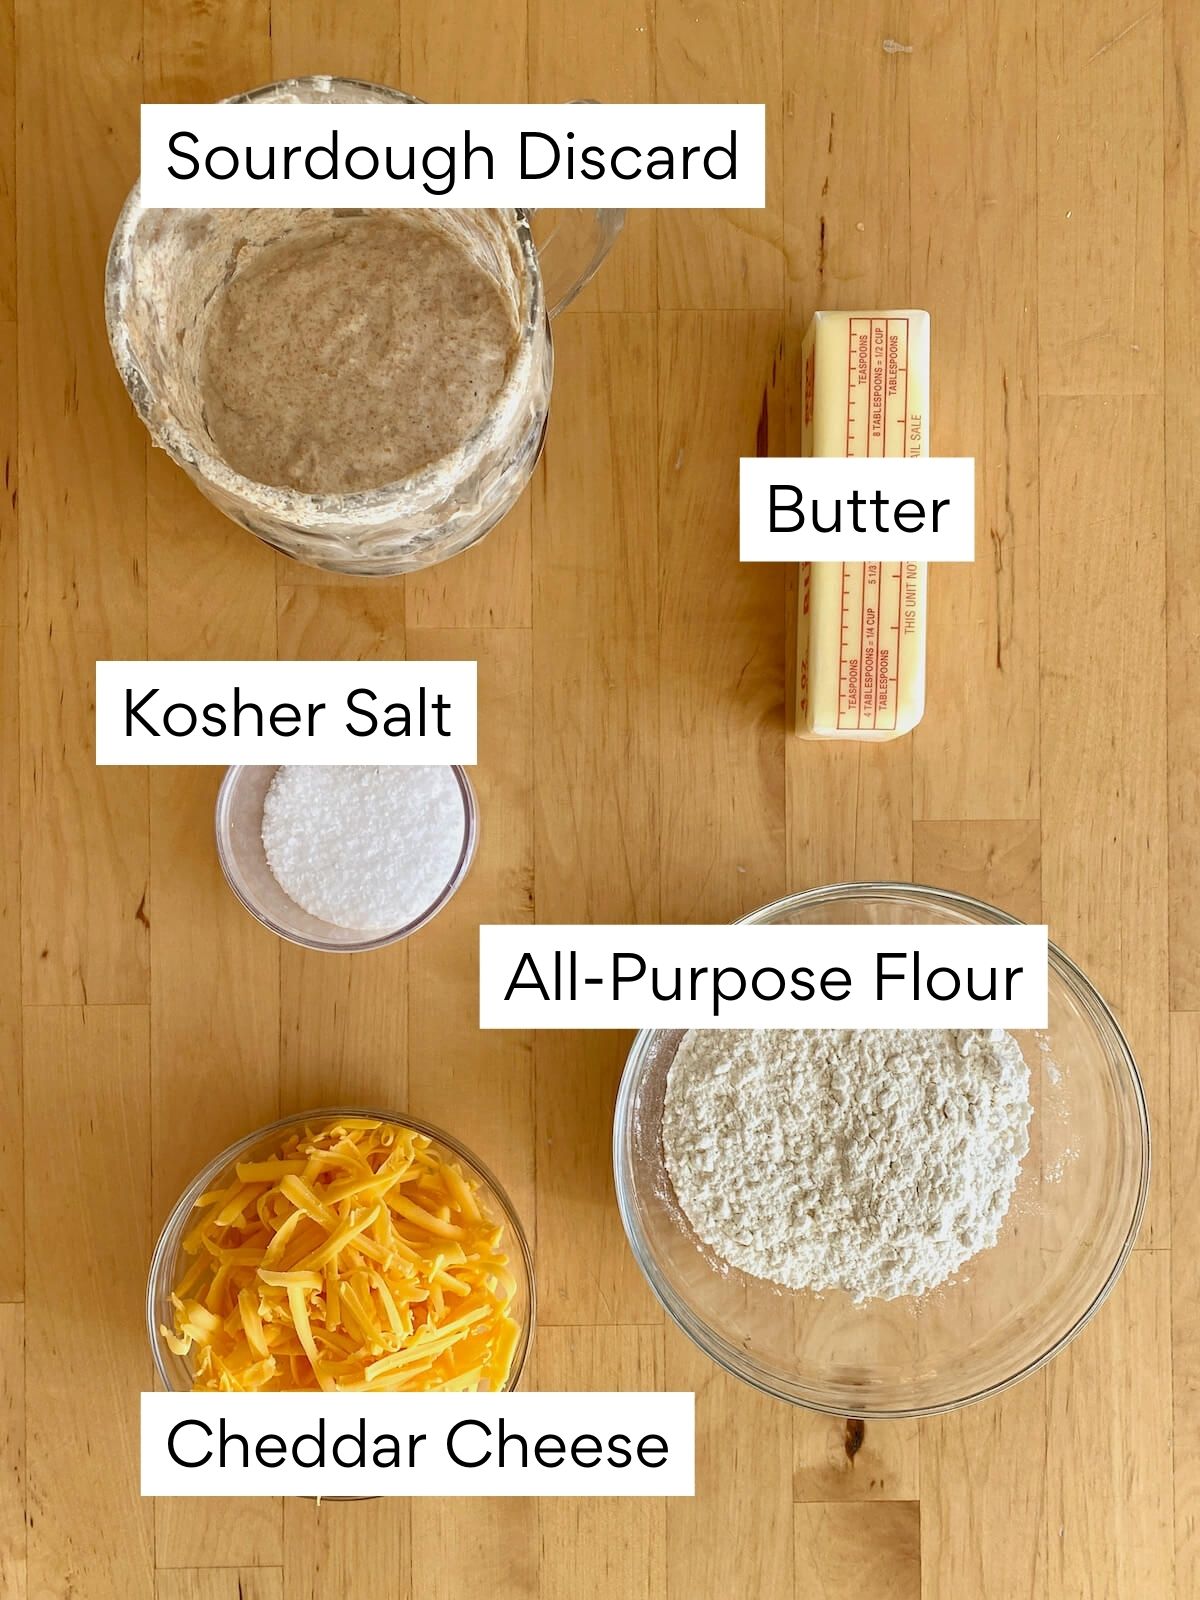 The ingredients to make sourdough discard cheese crackers. Each ingredient is labeled with text. They include sourdough discard, butter, kosher salt, all-purpose flour, and cheddar cheese.